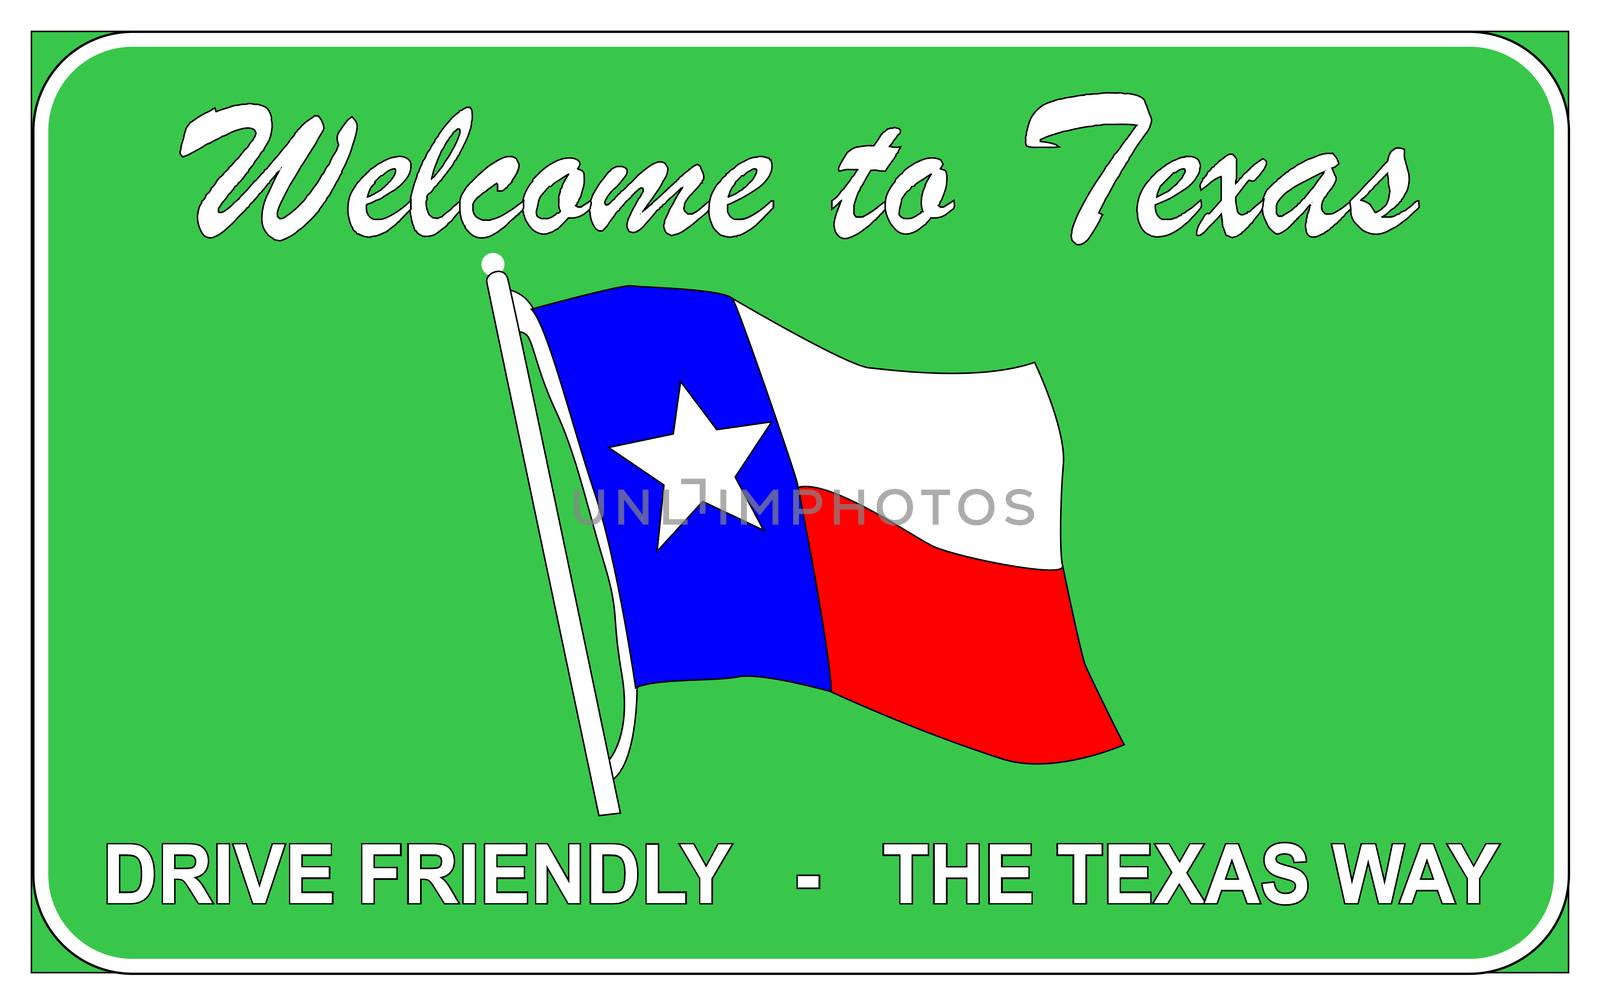 Welcome to Texas welcomung road trafic sign over a white background